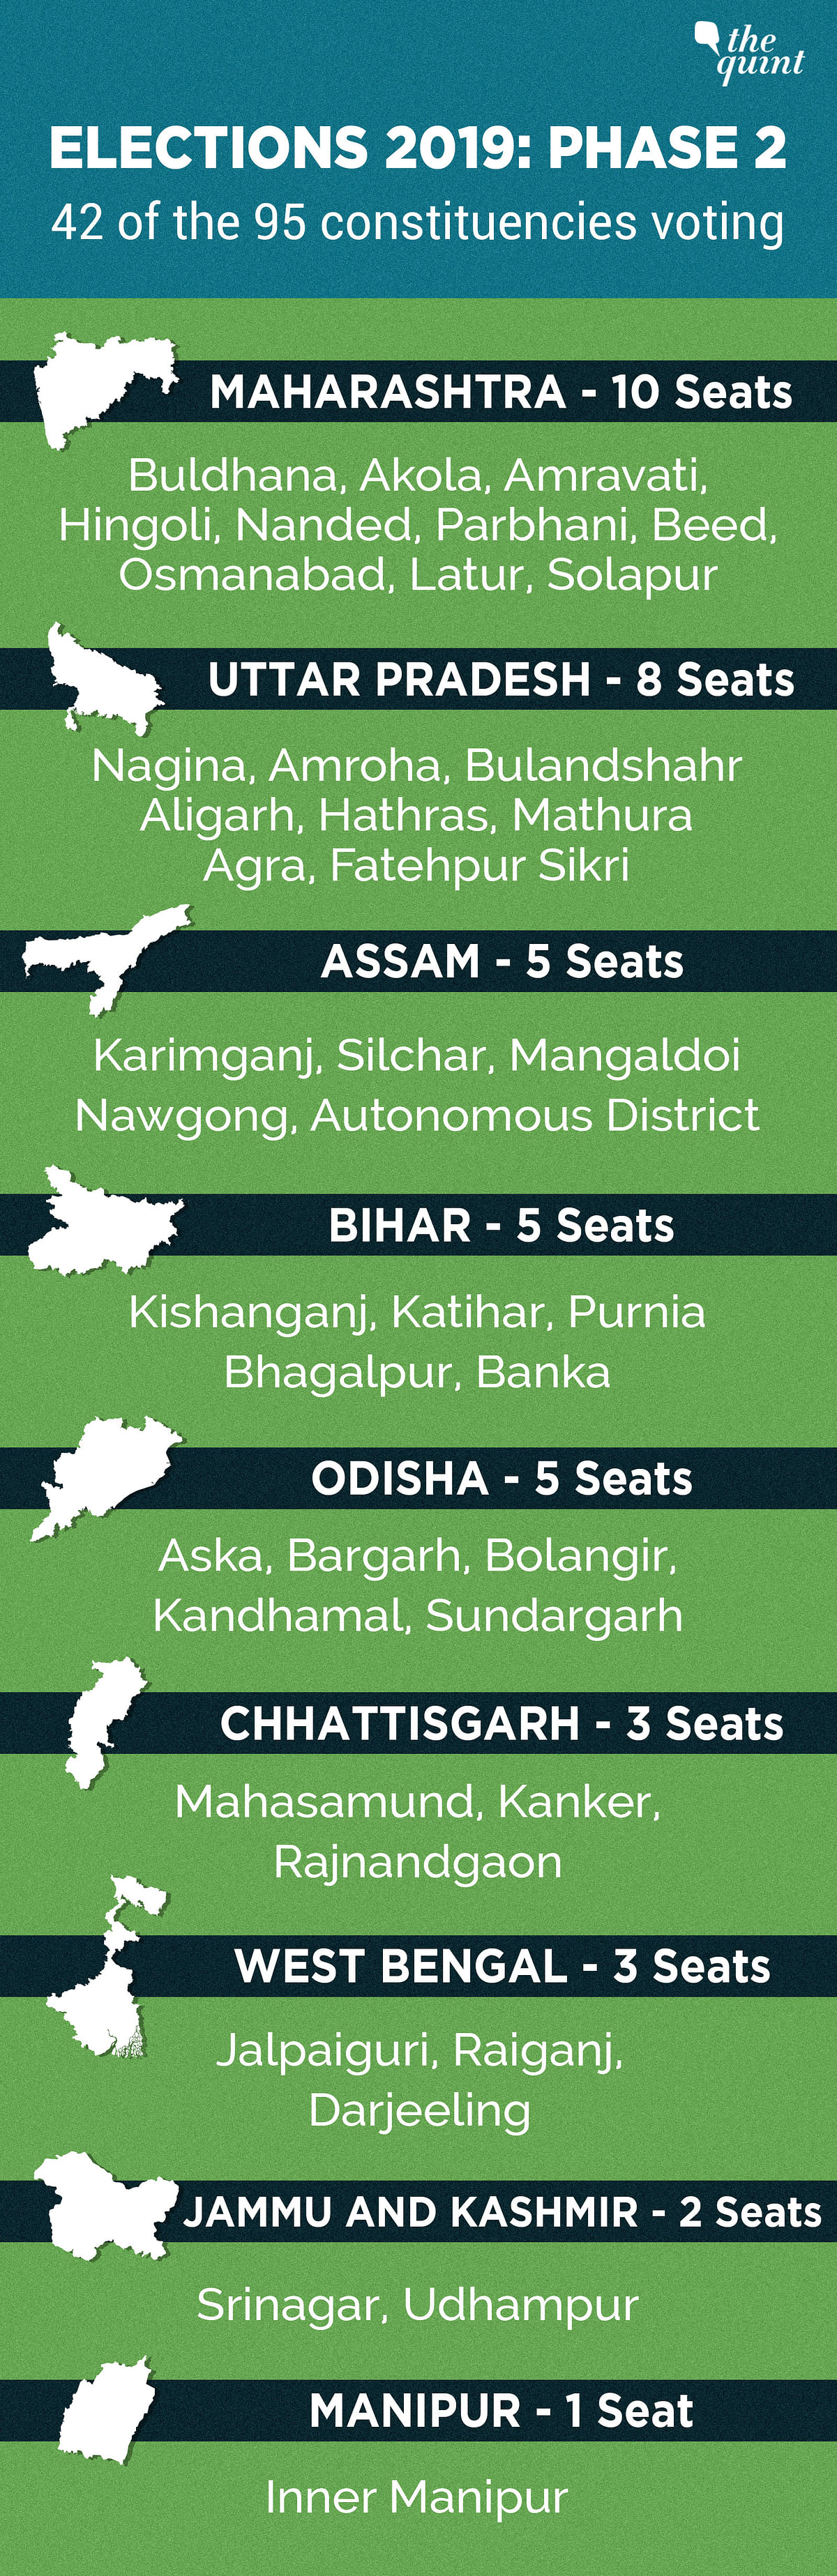 Tripura East, which was scheduled to vote in the second phase, will now vote in the third phase.